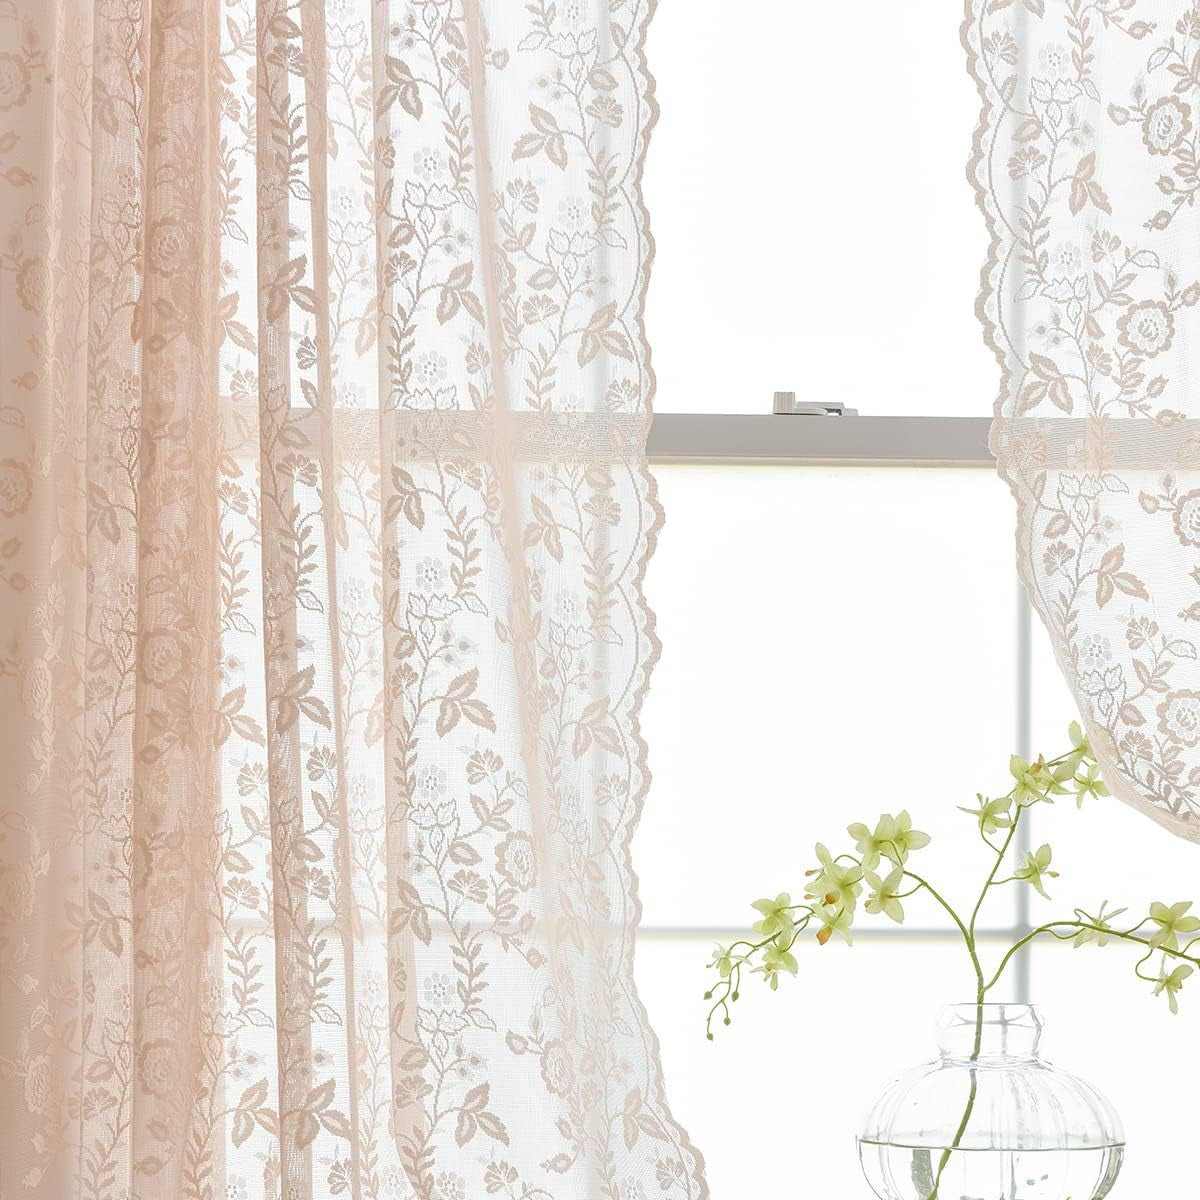 FINECITY Lace Curtains Country Rustic Floral Sheer Curtains for Living Room 72 Inch Length Drapes Vintage Floral Pattern Farmhouse Privacy Light Filtering Sheer Curtain 2 Panels, 52 X 72 Inch, Grey  Keyu Textile Blush Pink W52 X L63 Inch 